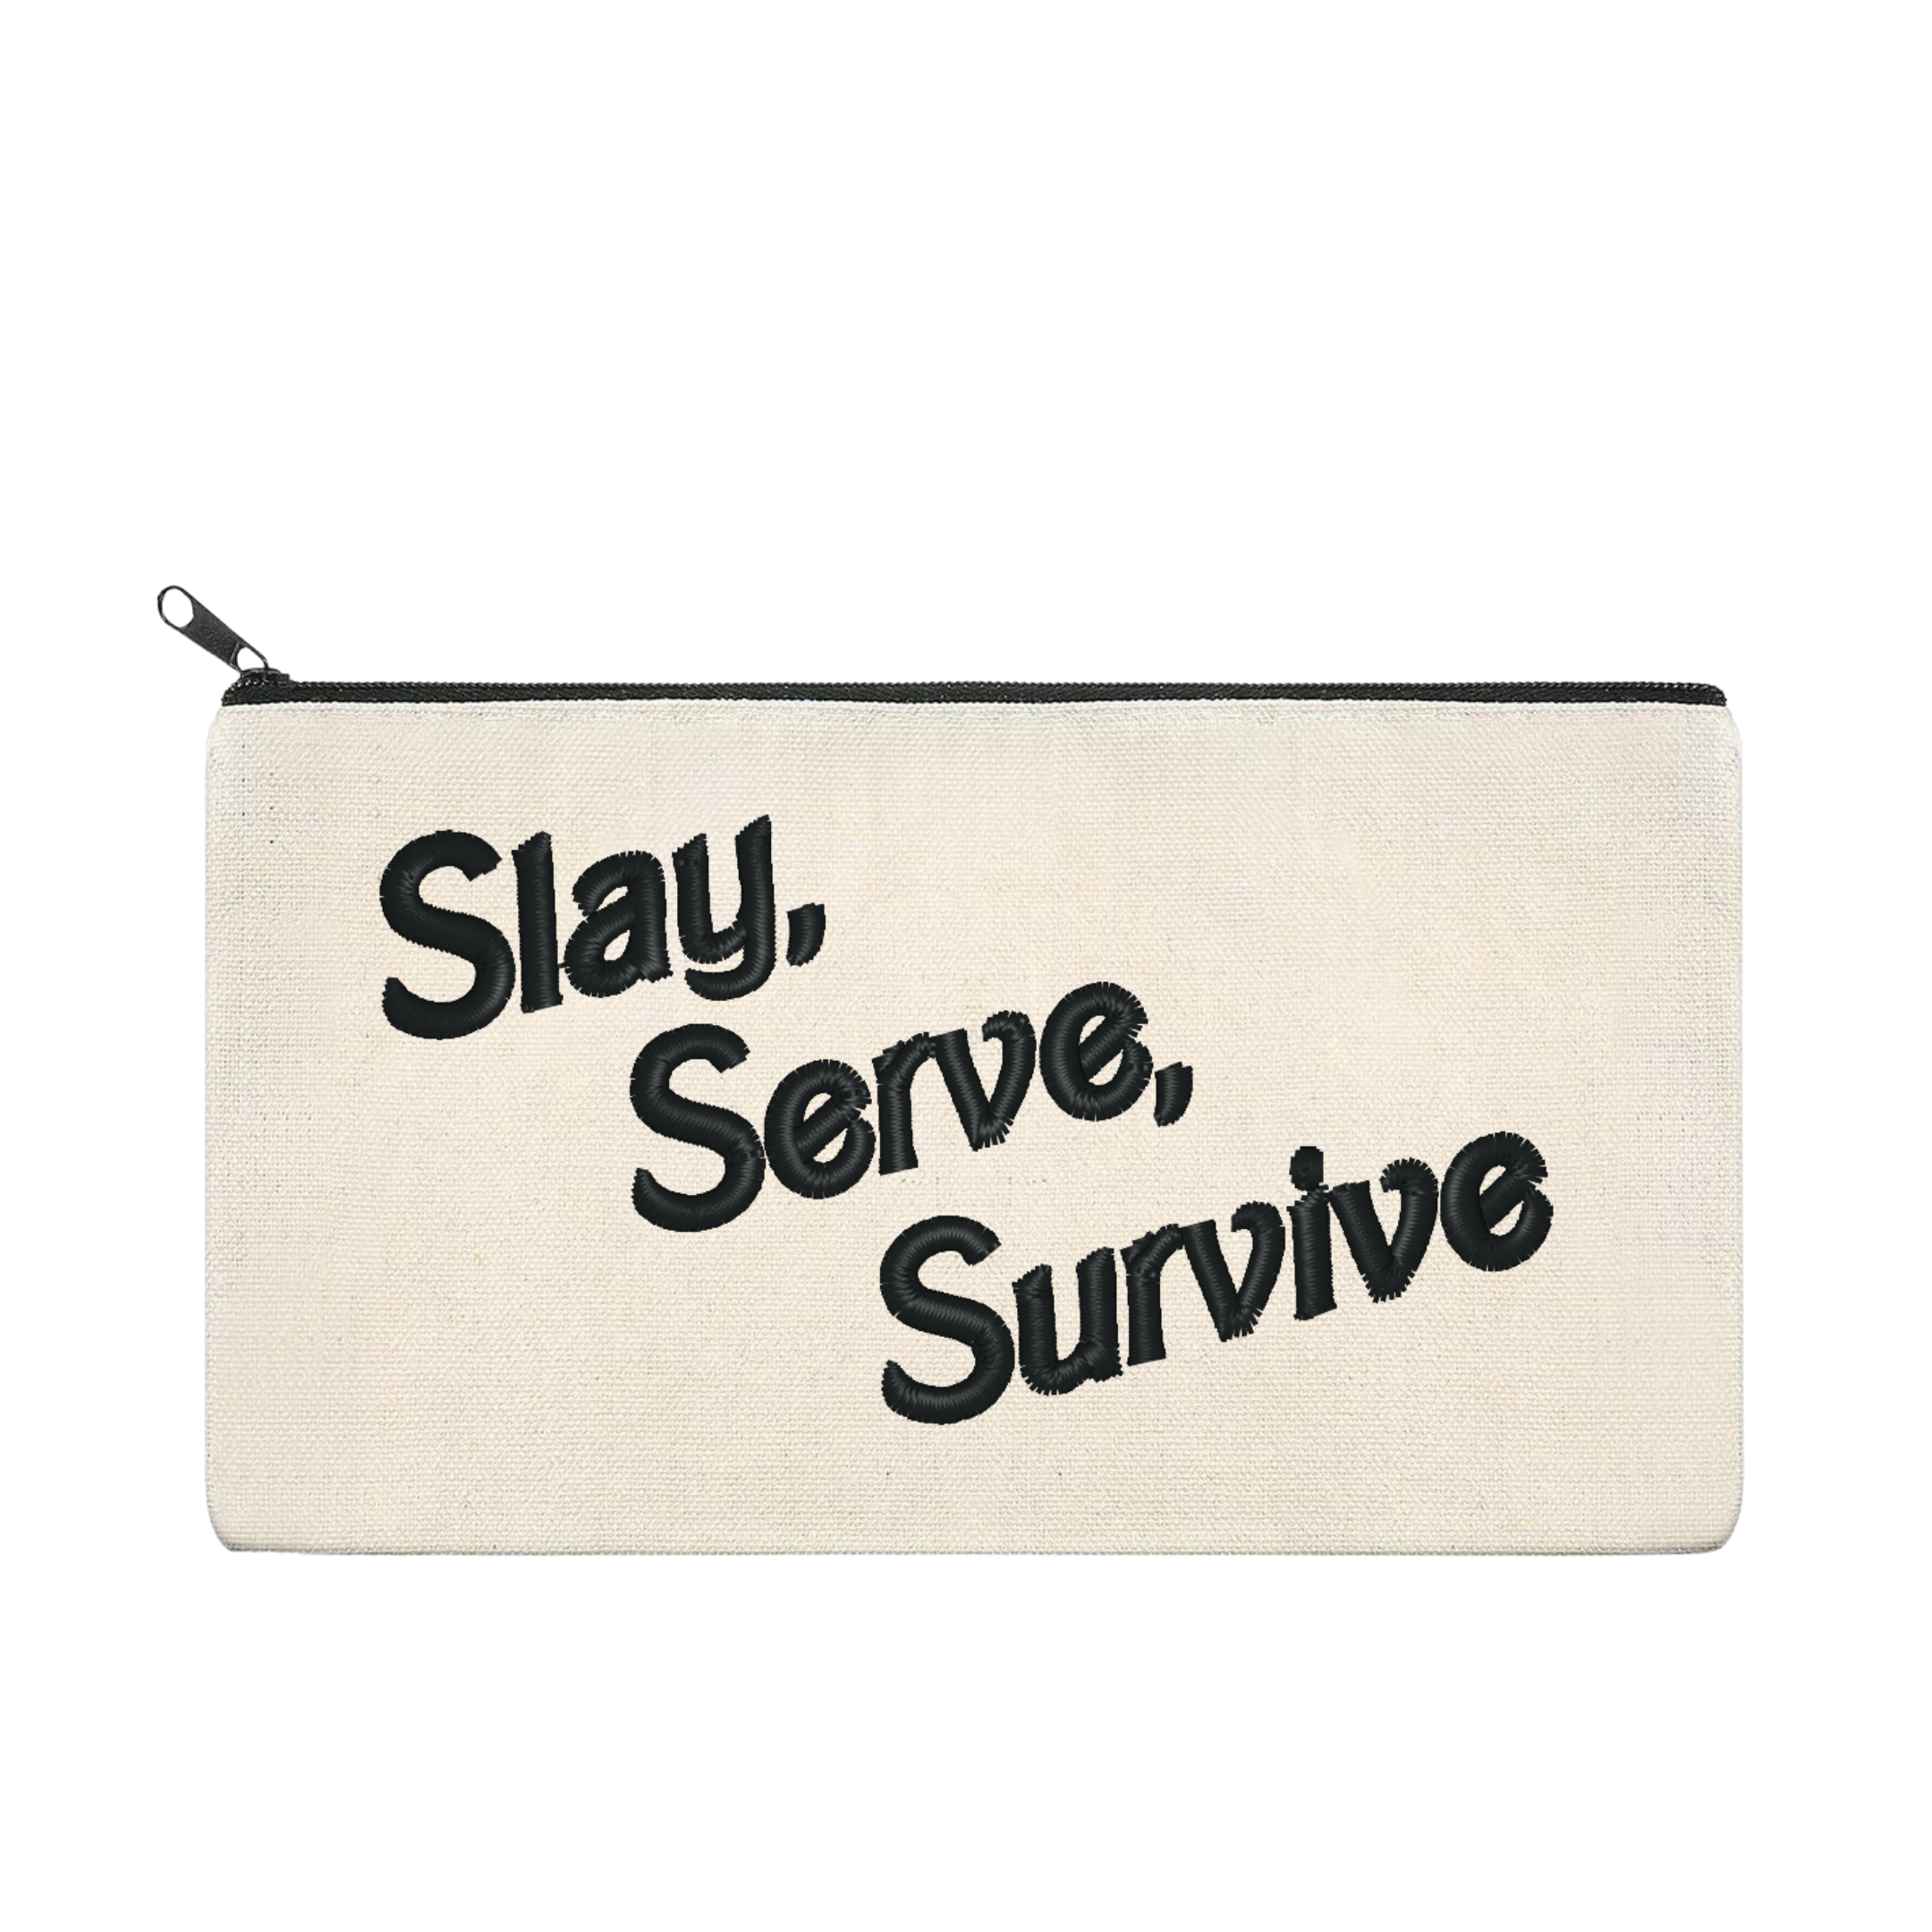 Slay. Serve. Survive. Embroidered Multipurpose Zipper Pouch Bag